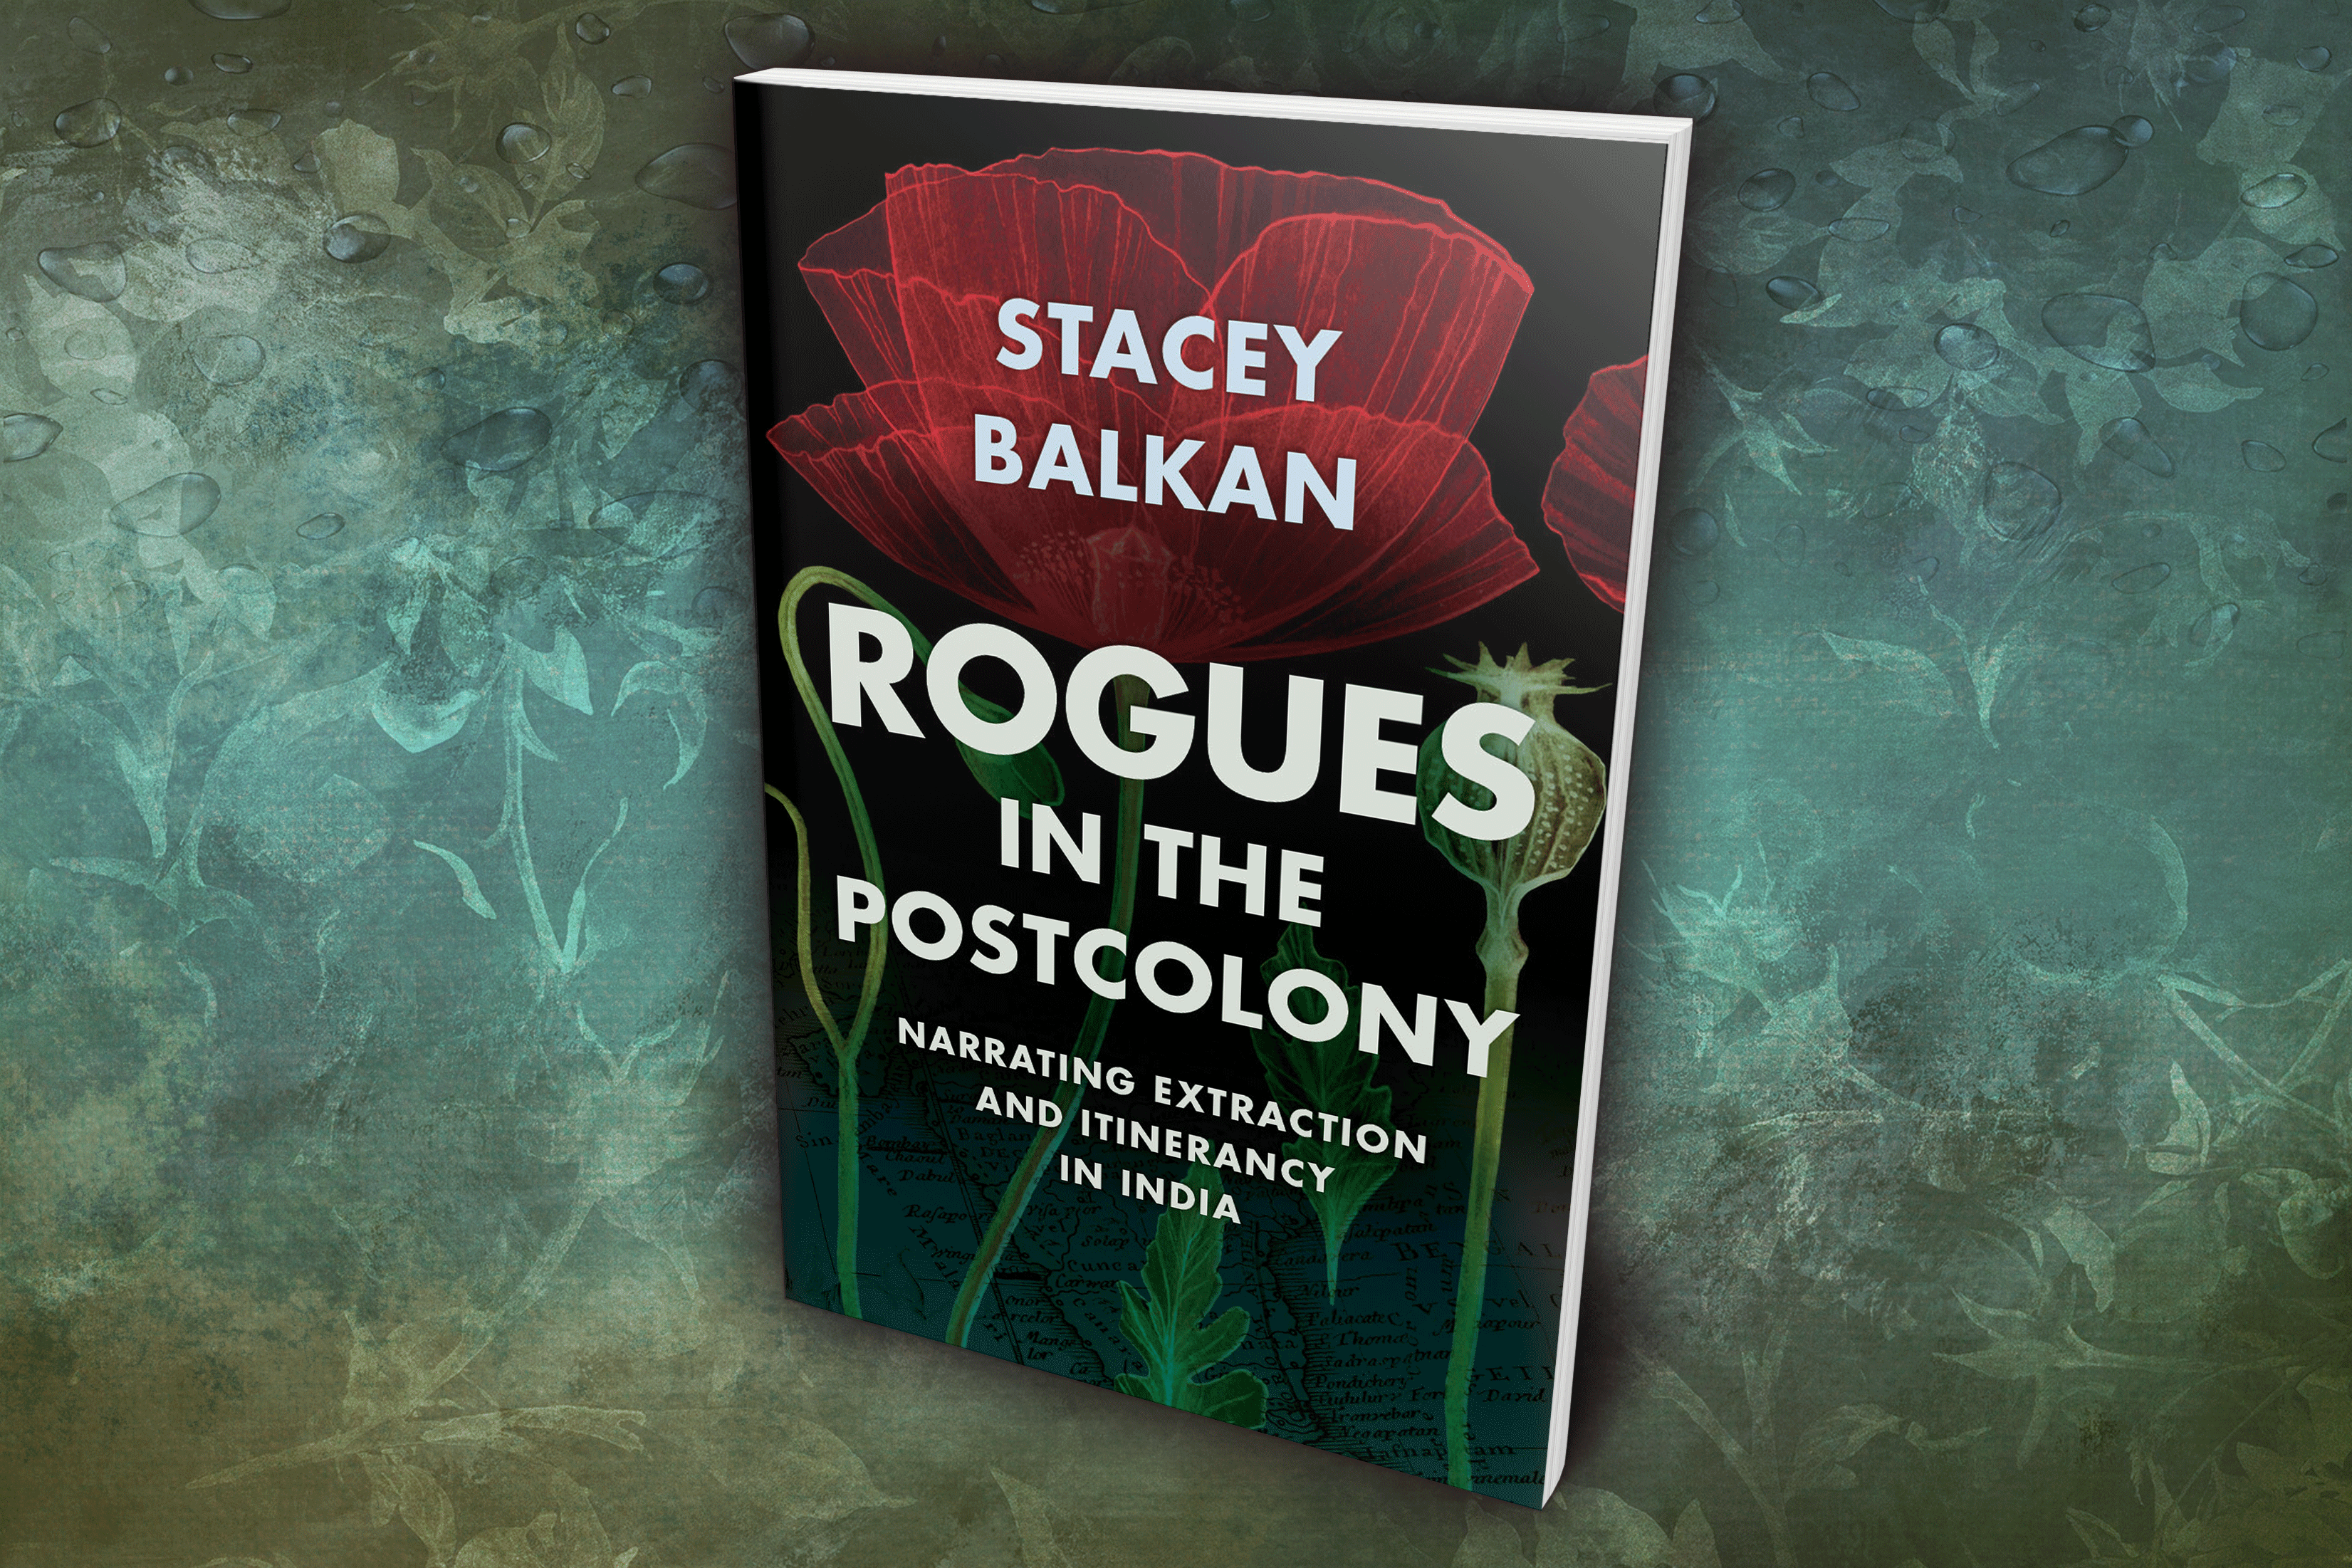 Stacey Balkan's Rogues in the Postcolony